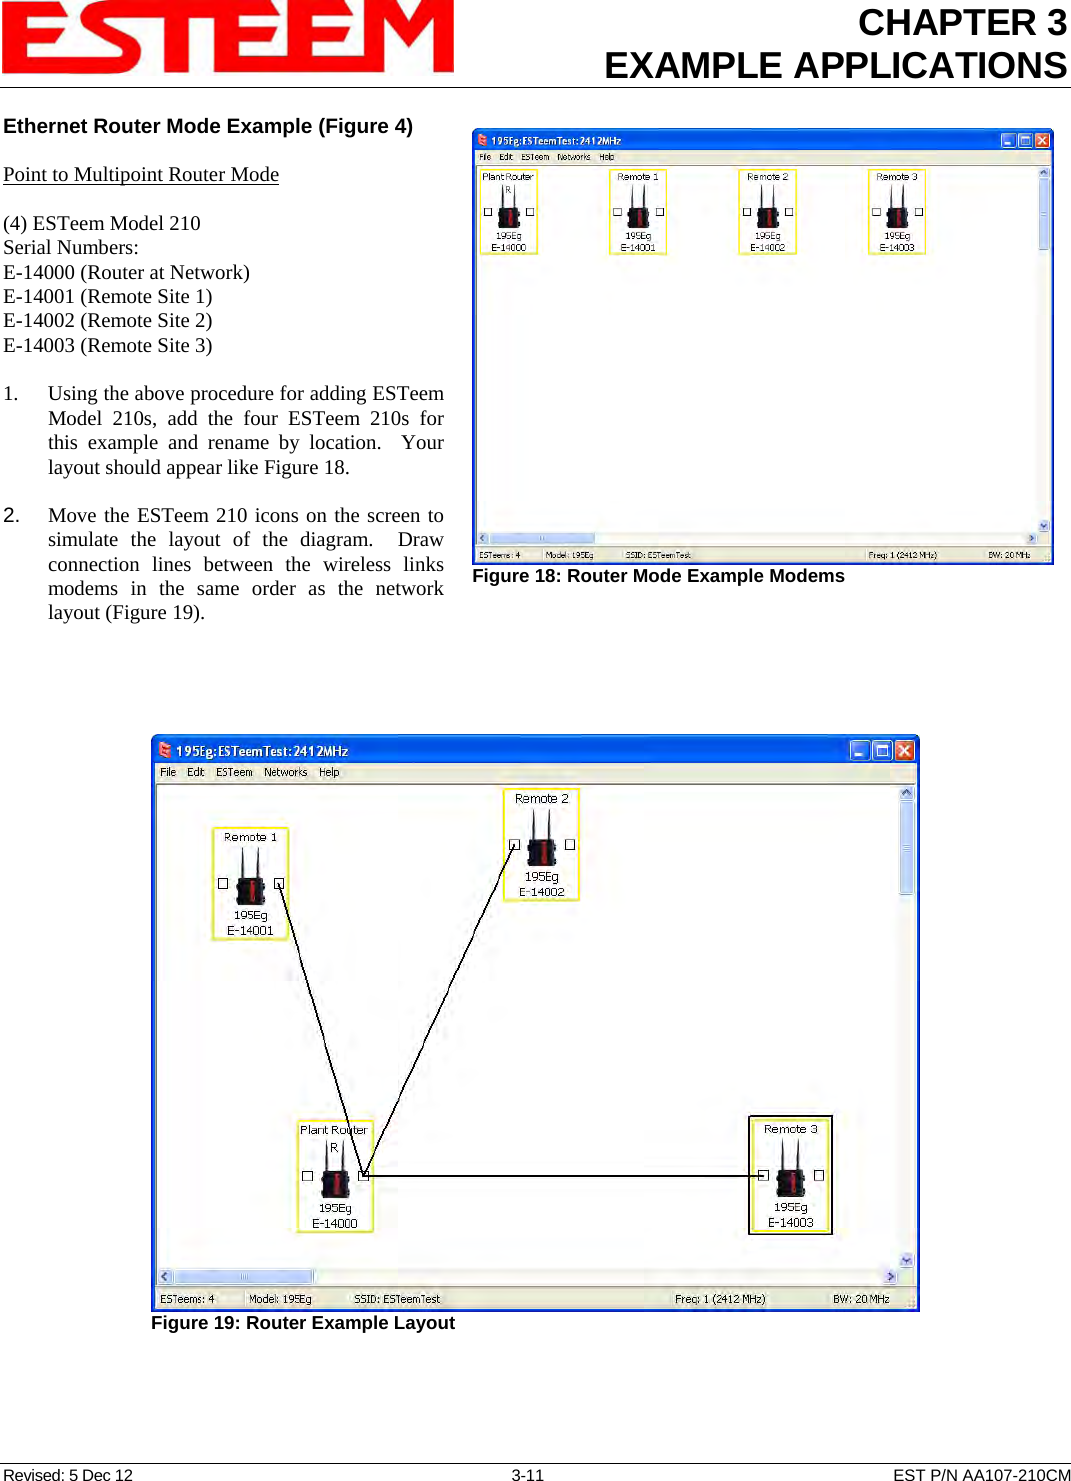 CHAPTER 3 EXAMPLE APPLICATIONS  Ethernet Router Mode Example (Figure 4)  Figure 18: Router Mode Example Modems    Point to Multipoint Router Mode  (4) ESTeem Model 210 Serial Numbers: E-14000 (Router at Network) E-14001 (Remote Site 1) E-14002 (Remote Site 2) E-14003 (Remote Site 3)  1.    Using the above procedure for adding ESTeem Model 210s, add the four ESTeem 210s for this example and rename by location.  Your layout should appear like Figure 18.   2.    Move the ESTeem 210 icons on the screen to simulate the layout of the diagram.  Draw connection lines between the wireless links modems in the same order as the network layout (Figure 19).    Figure 19: Router Example Layout Revised: 5 Dec 12  3-11  EST P/N AA107-210CM 